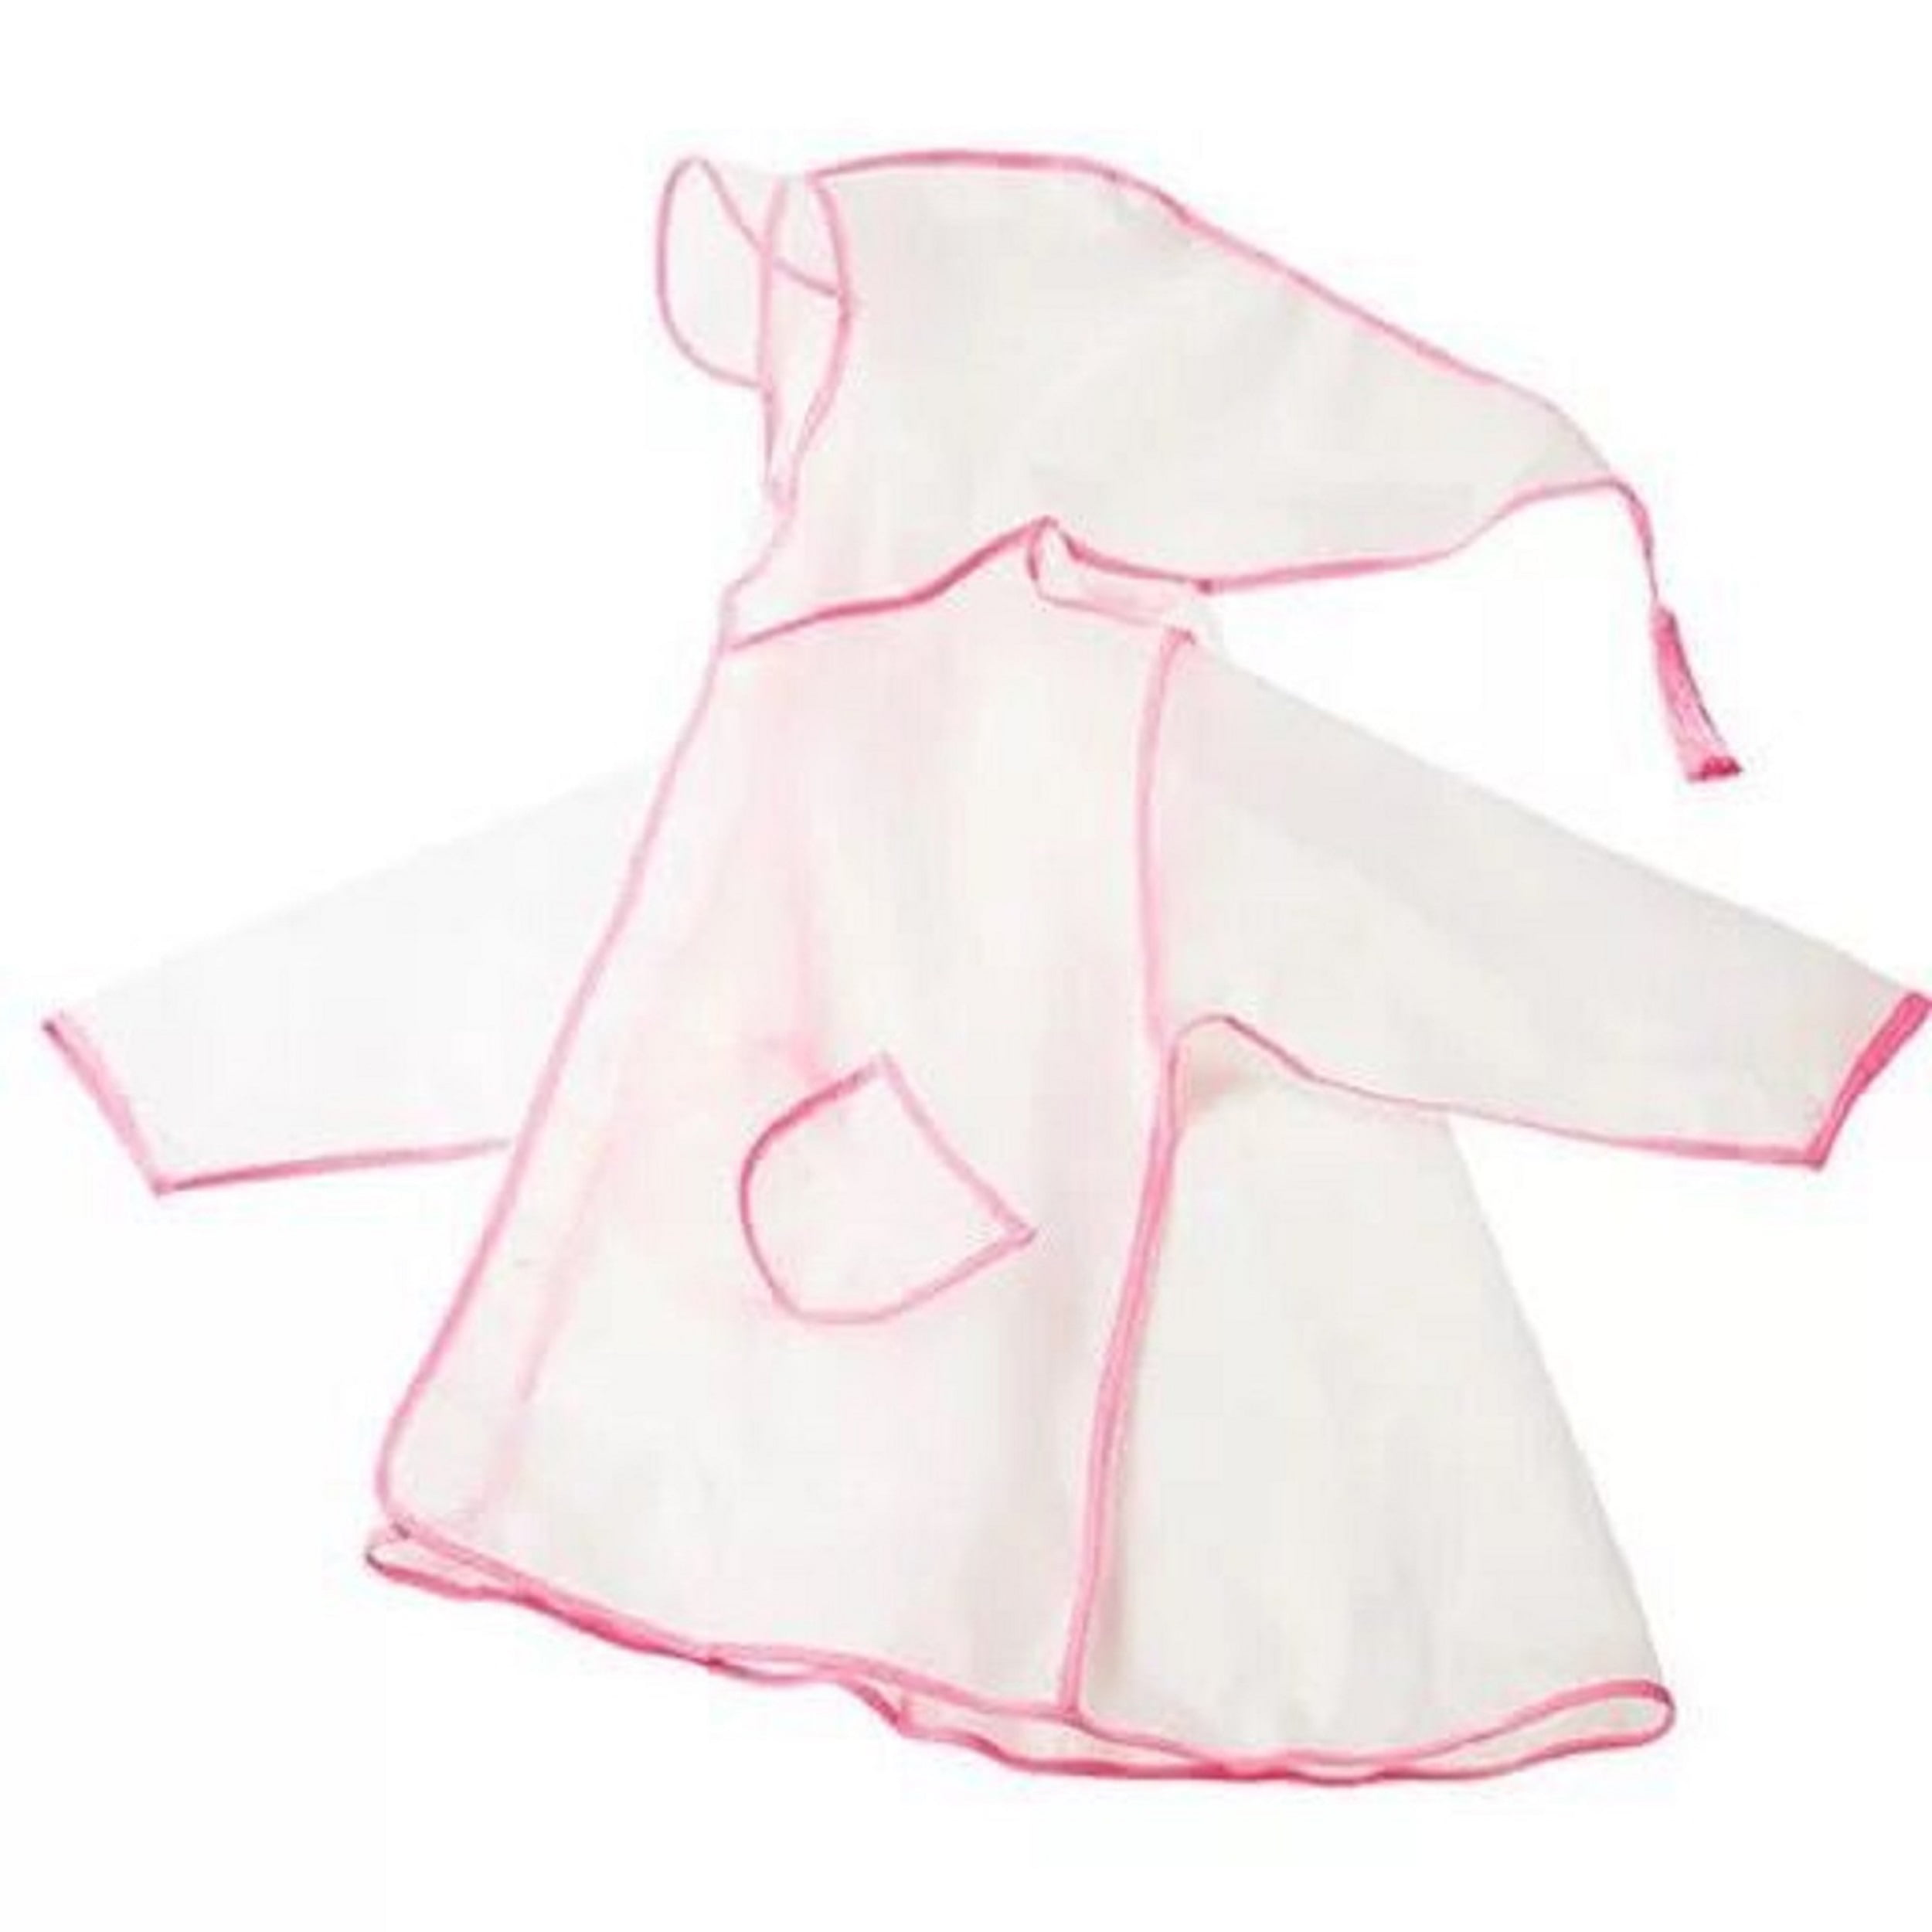 14 Girls Boys Kids Fashion Rain Poncho Raincoat with Hood and Sleeves Reusable for Ages 5 